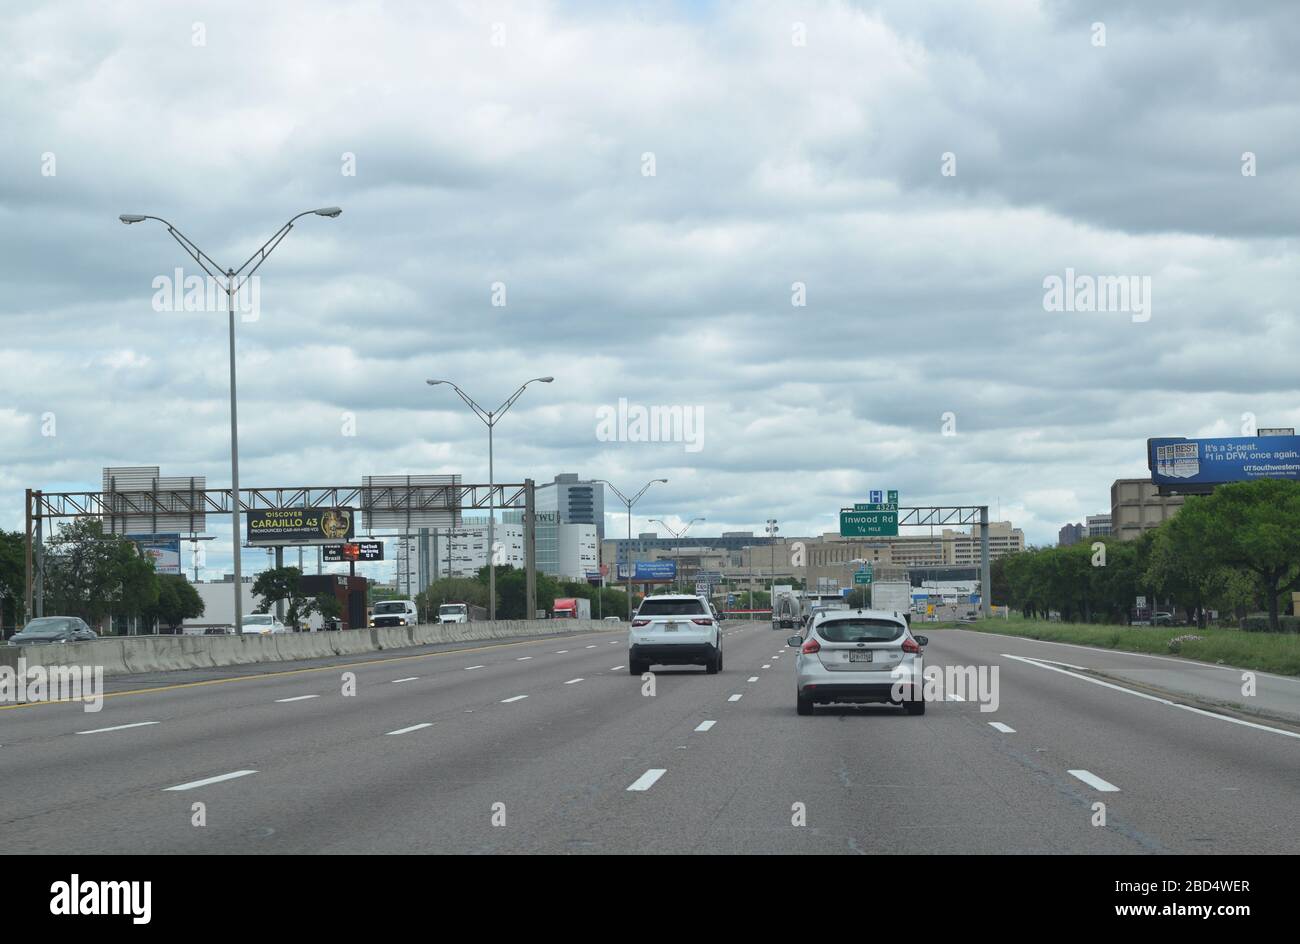 Interstate 35E traveling toward downtown Dallas has moderate traffic in the middle of a weekday despite the 'stay at home' order imposed by Dallas County and the city of Dallas. Stock Photo